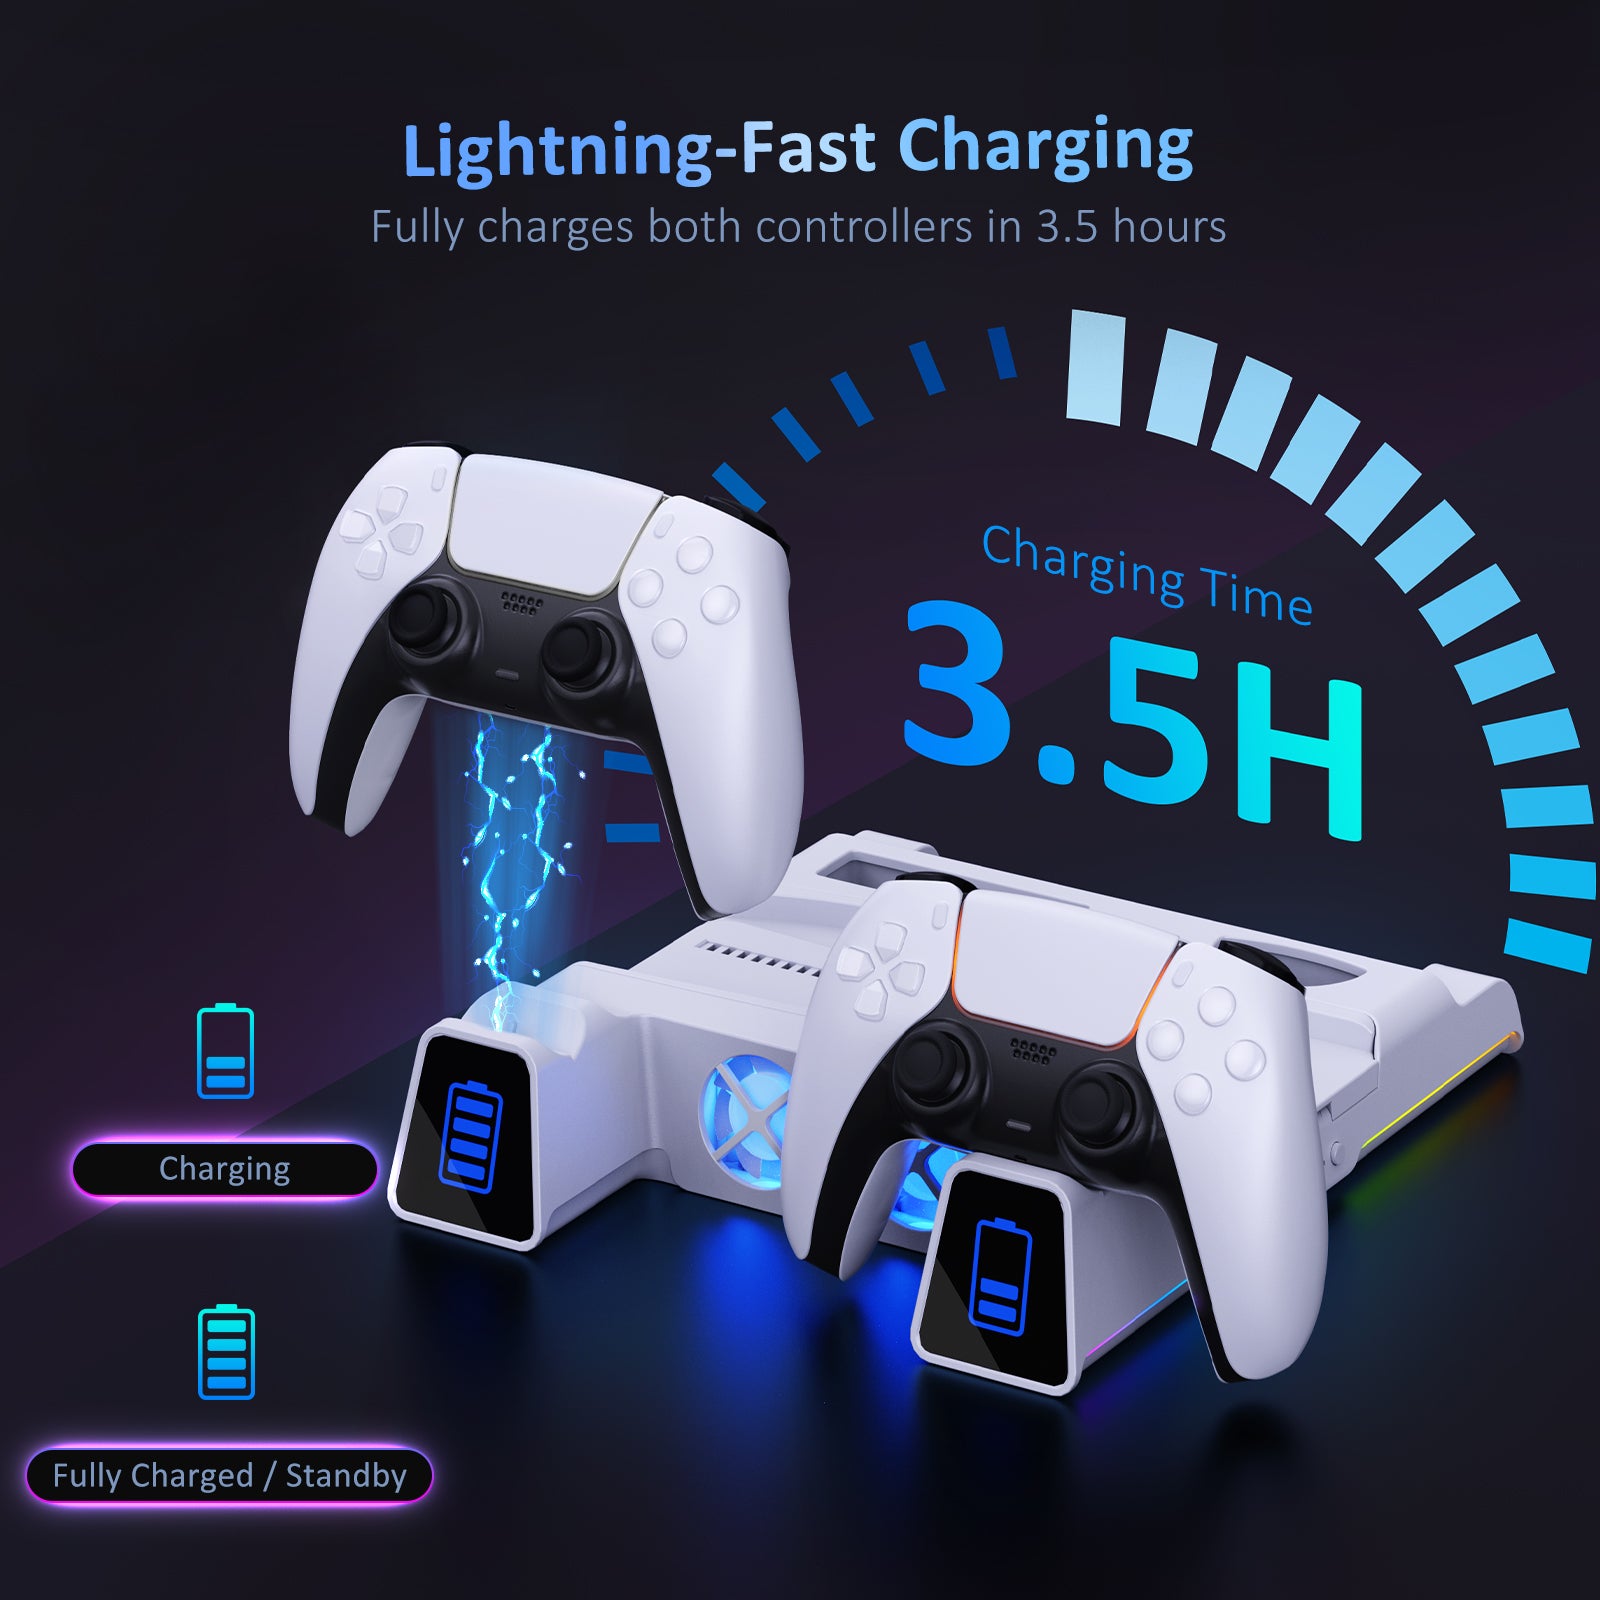 Two DualSense and DualSense Edge controllers fully charge in just 3.5 hours, while the charging indicator displays a steady blue color when they are fully charged.